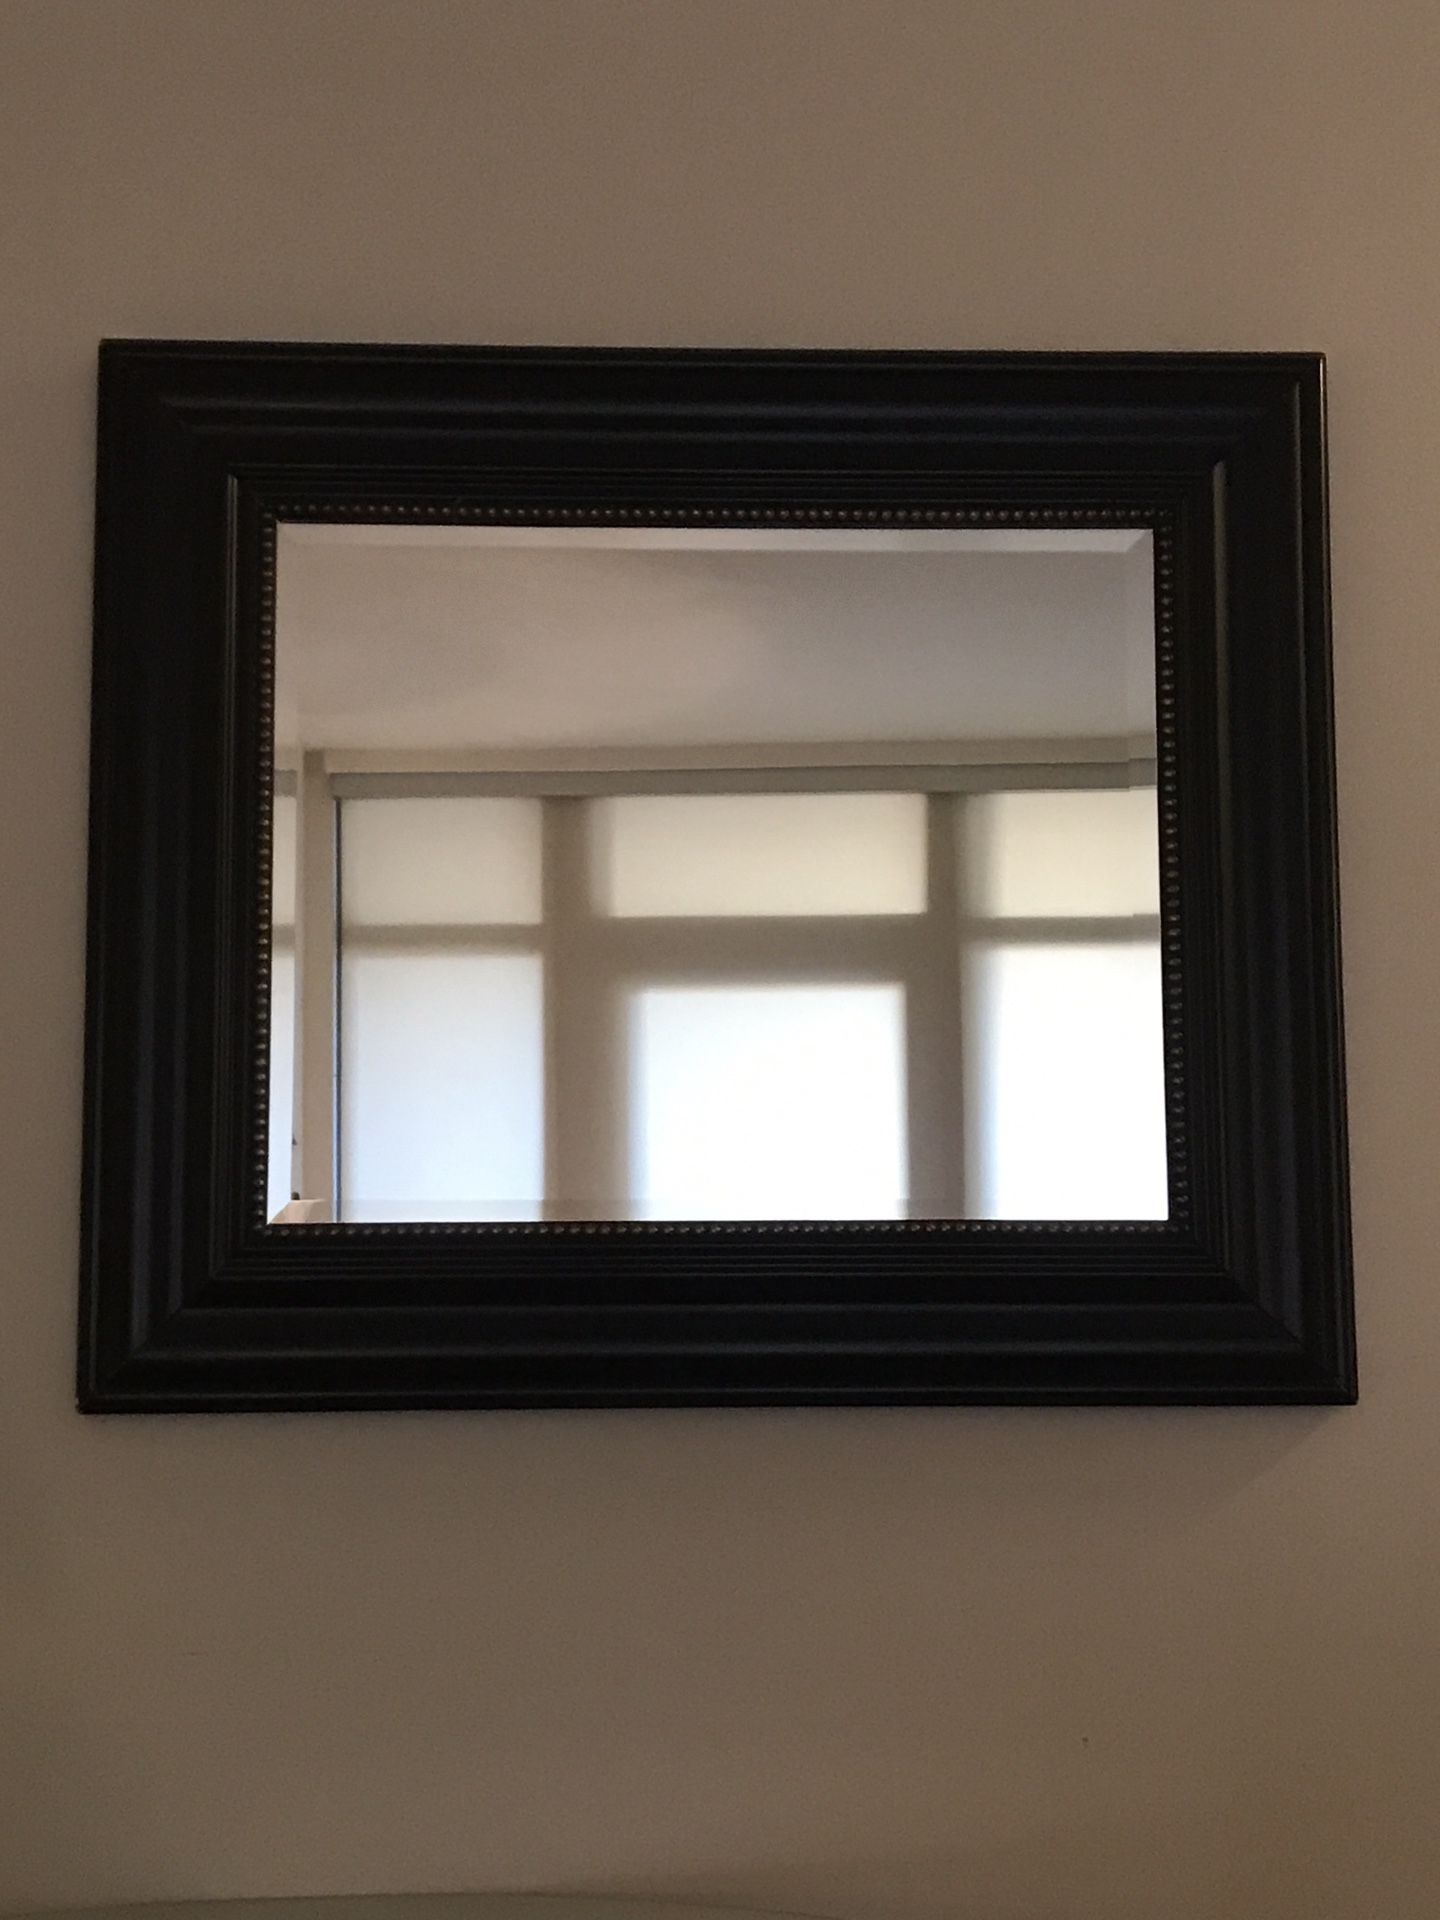 FREE- MUST PICKUP BY 10AM!! Black hanging mirror